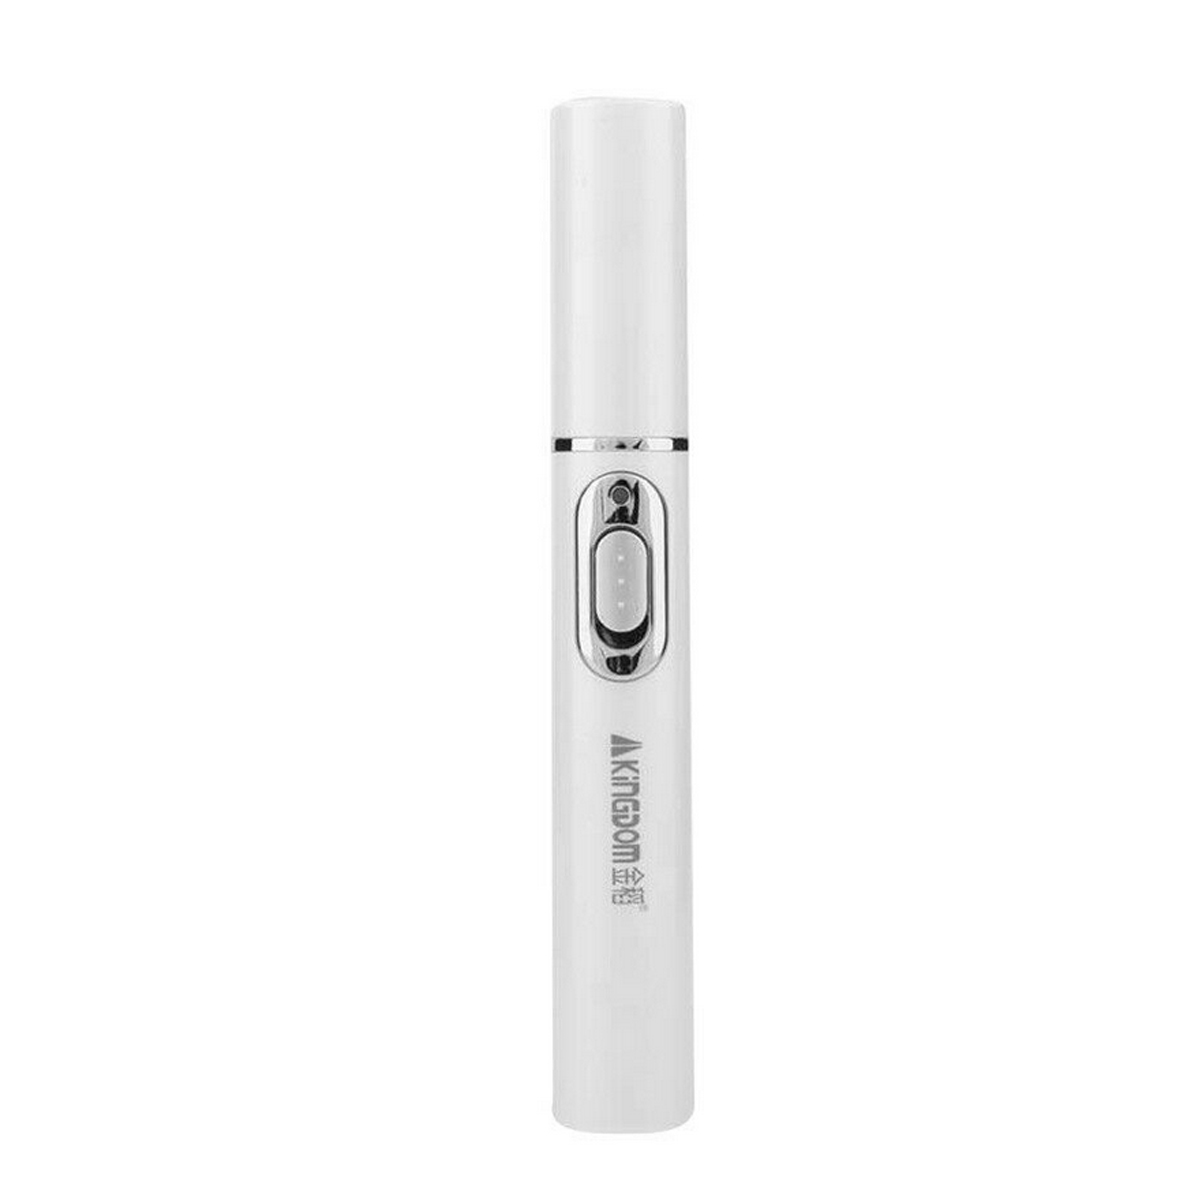 RUEWEY Medical Blue Light Therapy Laser Treatment Pen Acne Skin Care Device - image 3 of 5